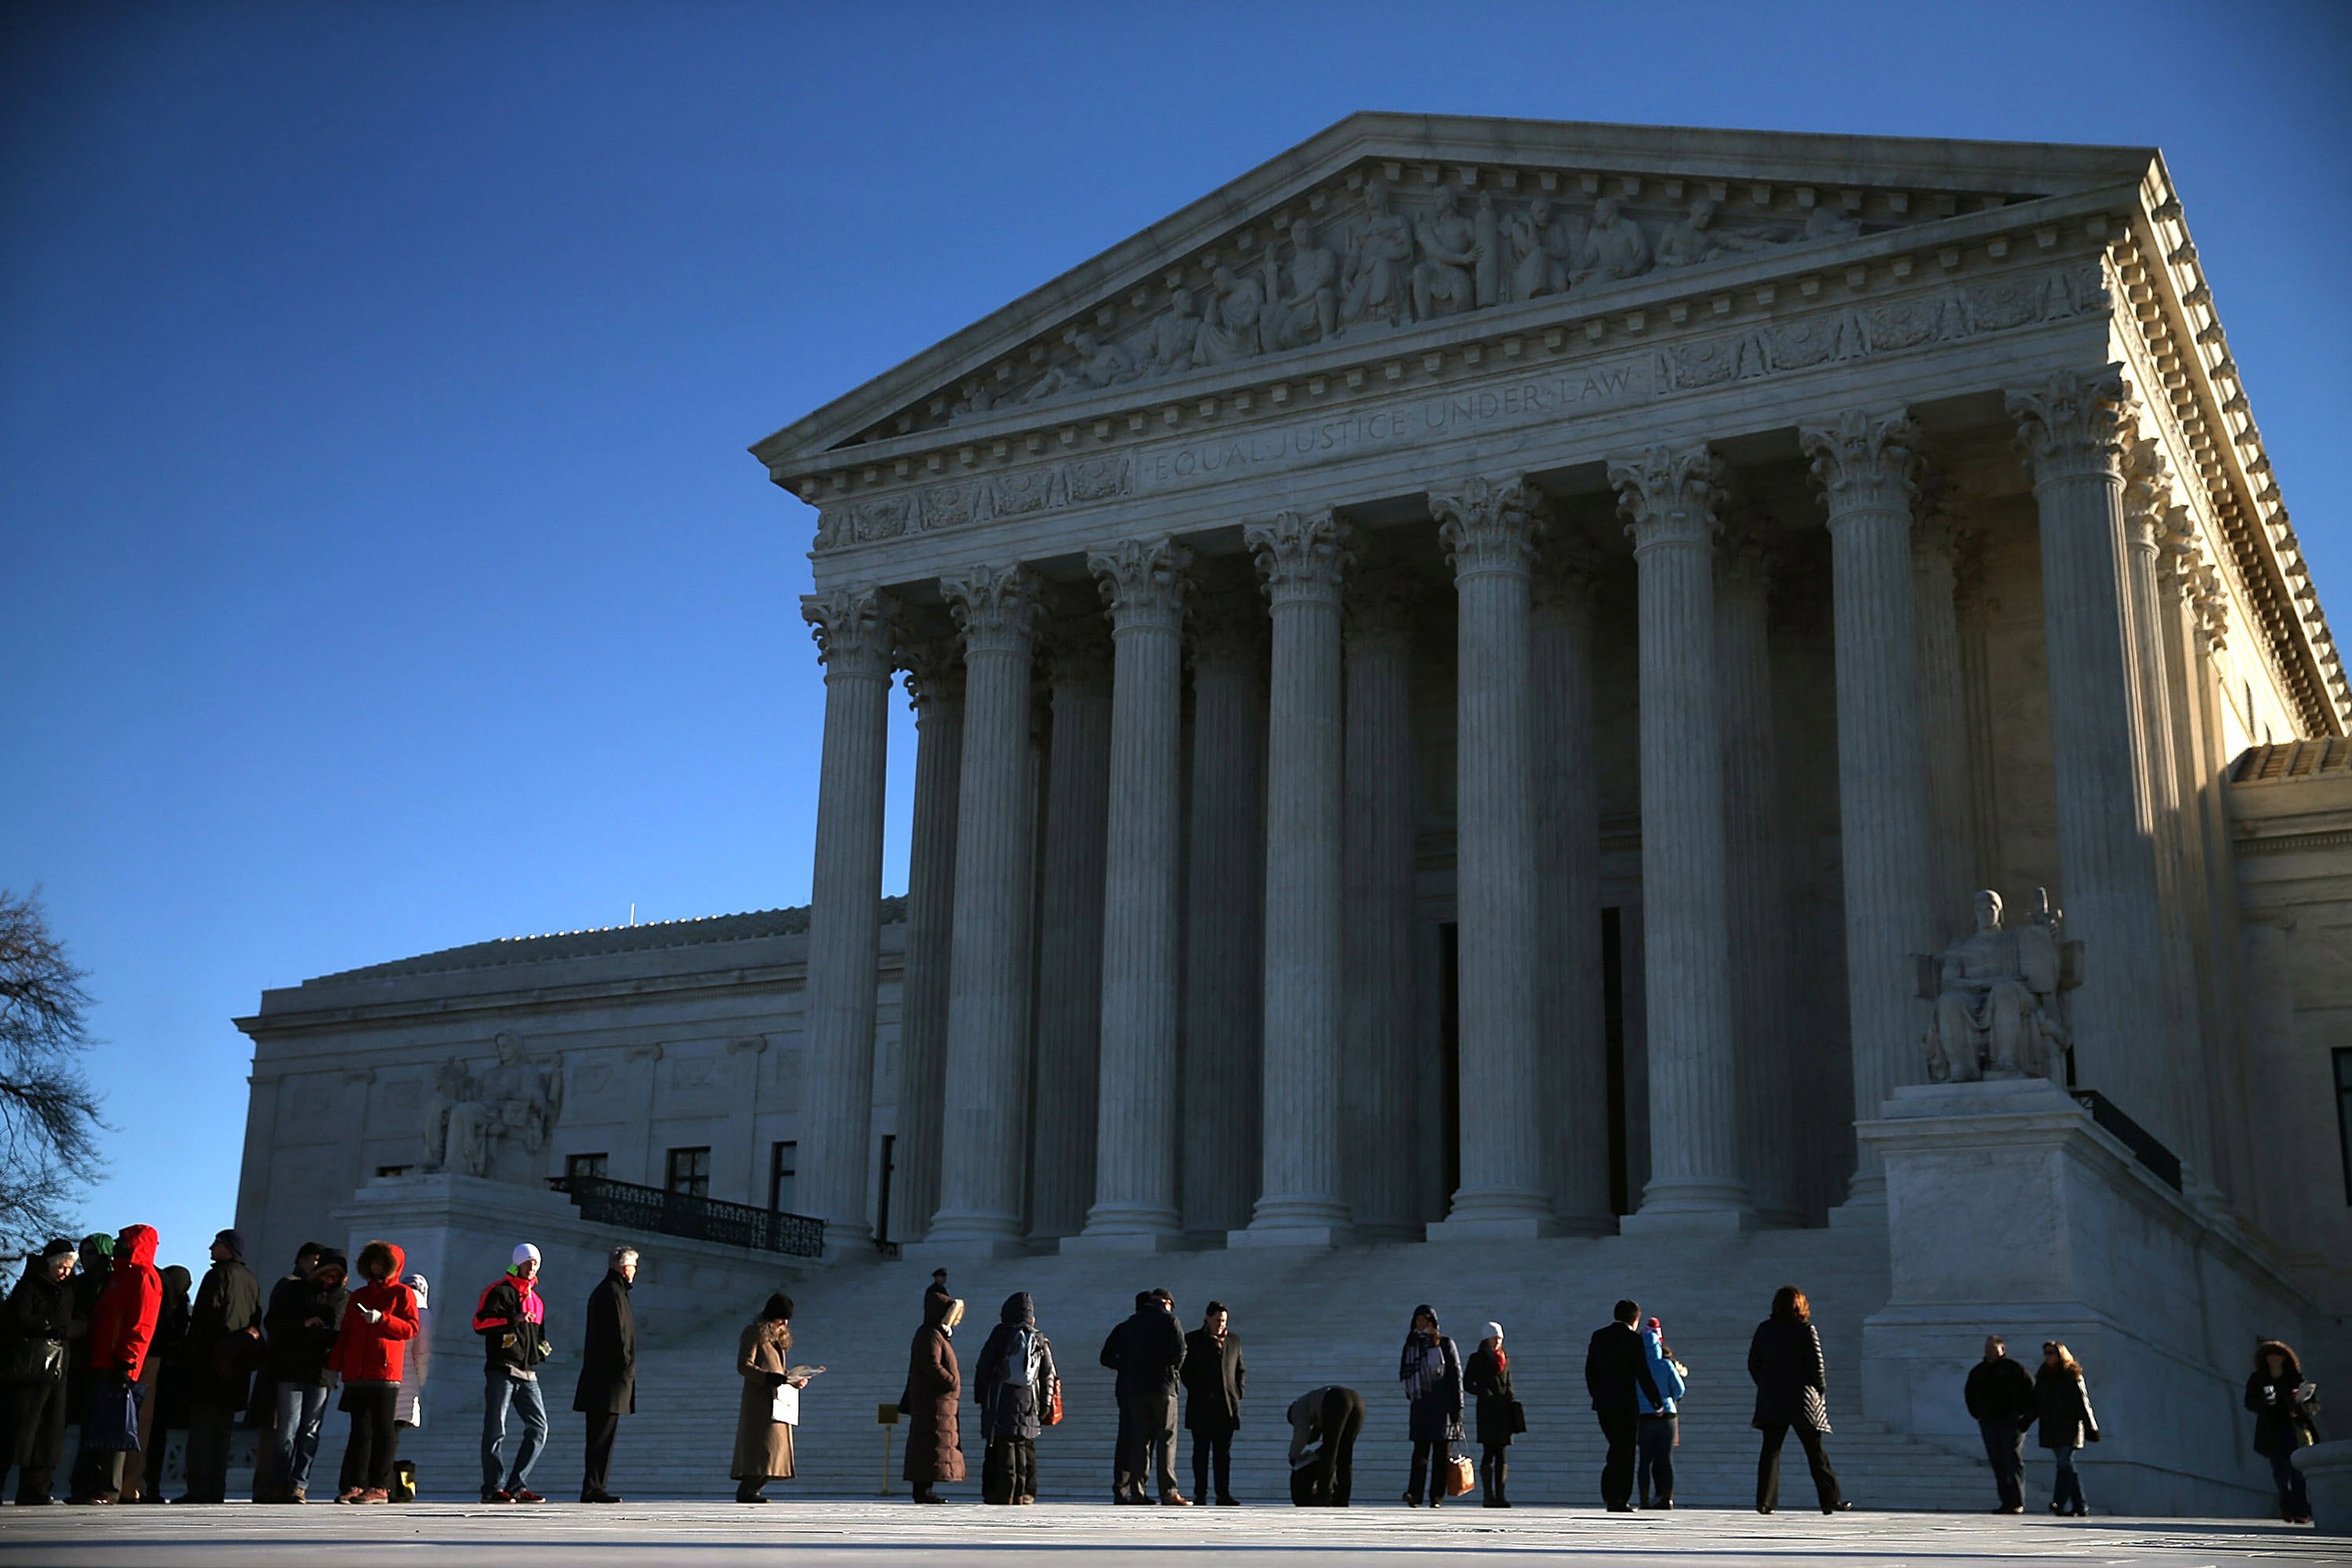 WASHINGTON, DC - JANUARY 11:  People wait in line to enter the US Supreme Court building January 11, 2016 in Washington, DC. The high court is hearing arguments in the Friedrichs v. California Teachers Association case. The case will decide whether California and twenty two other states can make public-employees, such as public school teacher Rebecca Friedrichs, to pay union agency fees.  (Photo by Mark Wilson/Getty Images)